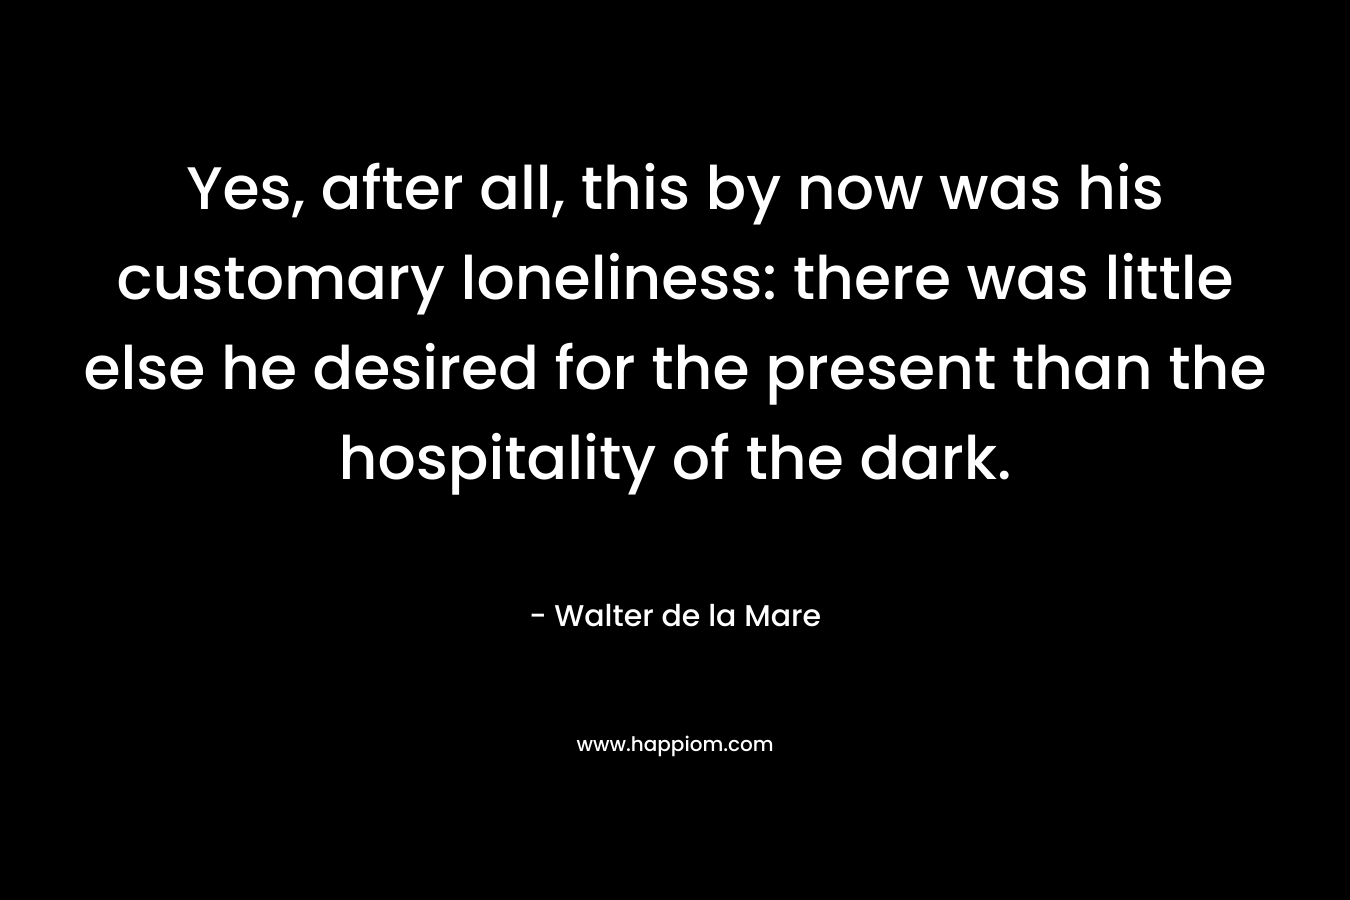 Yes, after all, this by now was his customary loneliness: there was little else he desired for the present than the hospitality of the dark. – Walter de la Mare